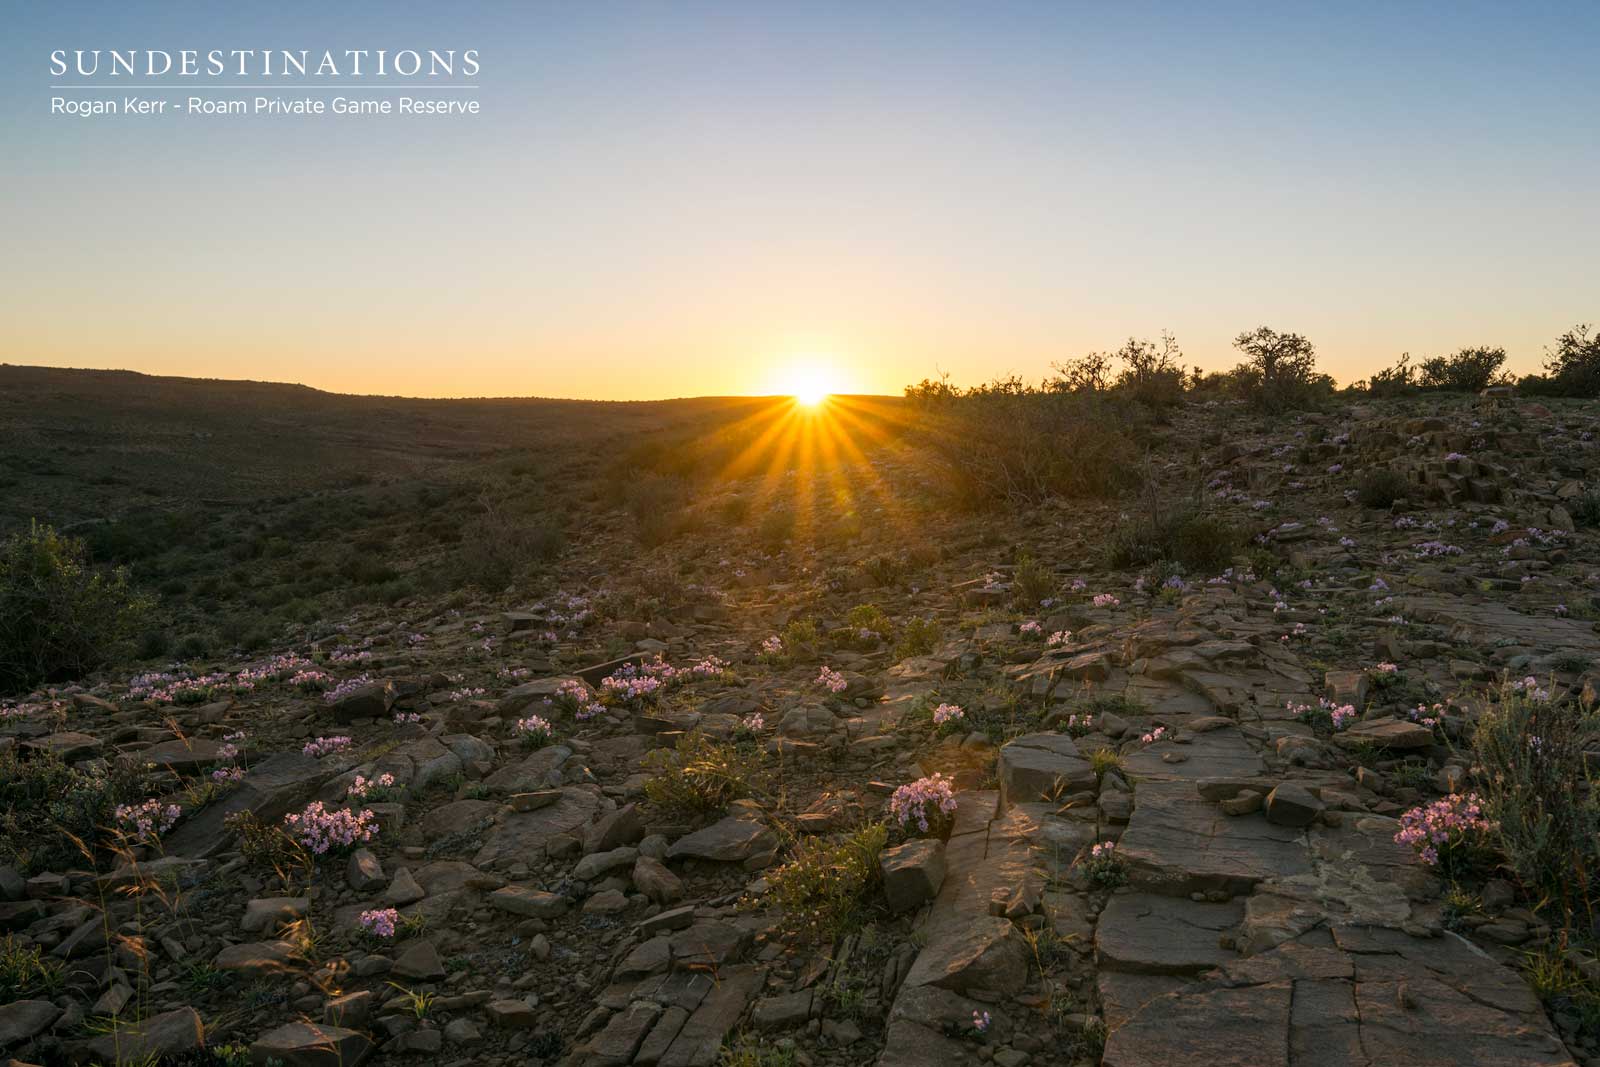 Sunset in the Great Karoo